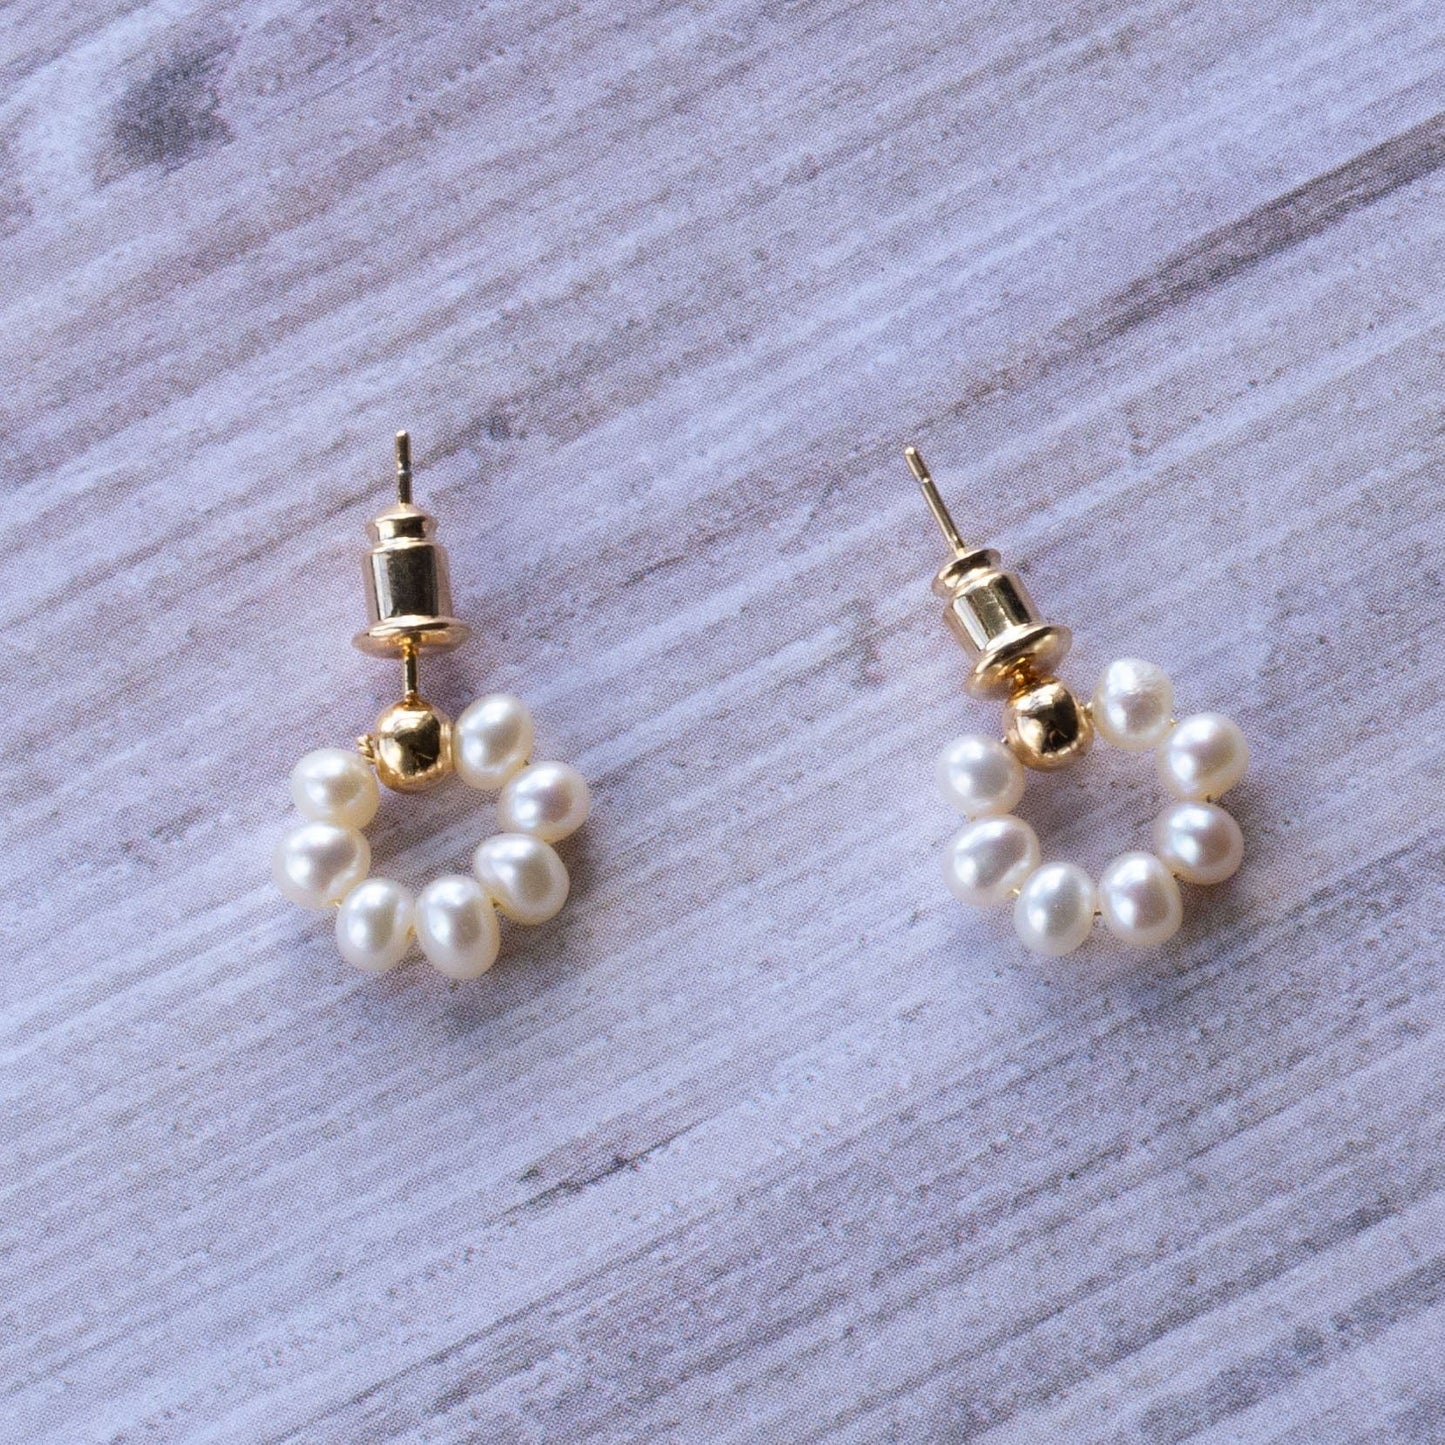 Arbor Trading Post Earrings Handcrafted Freshwater White Pearl Small Hoop Gold Earrings